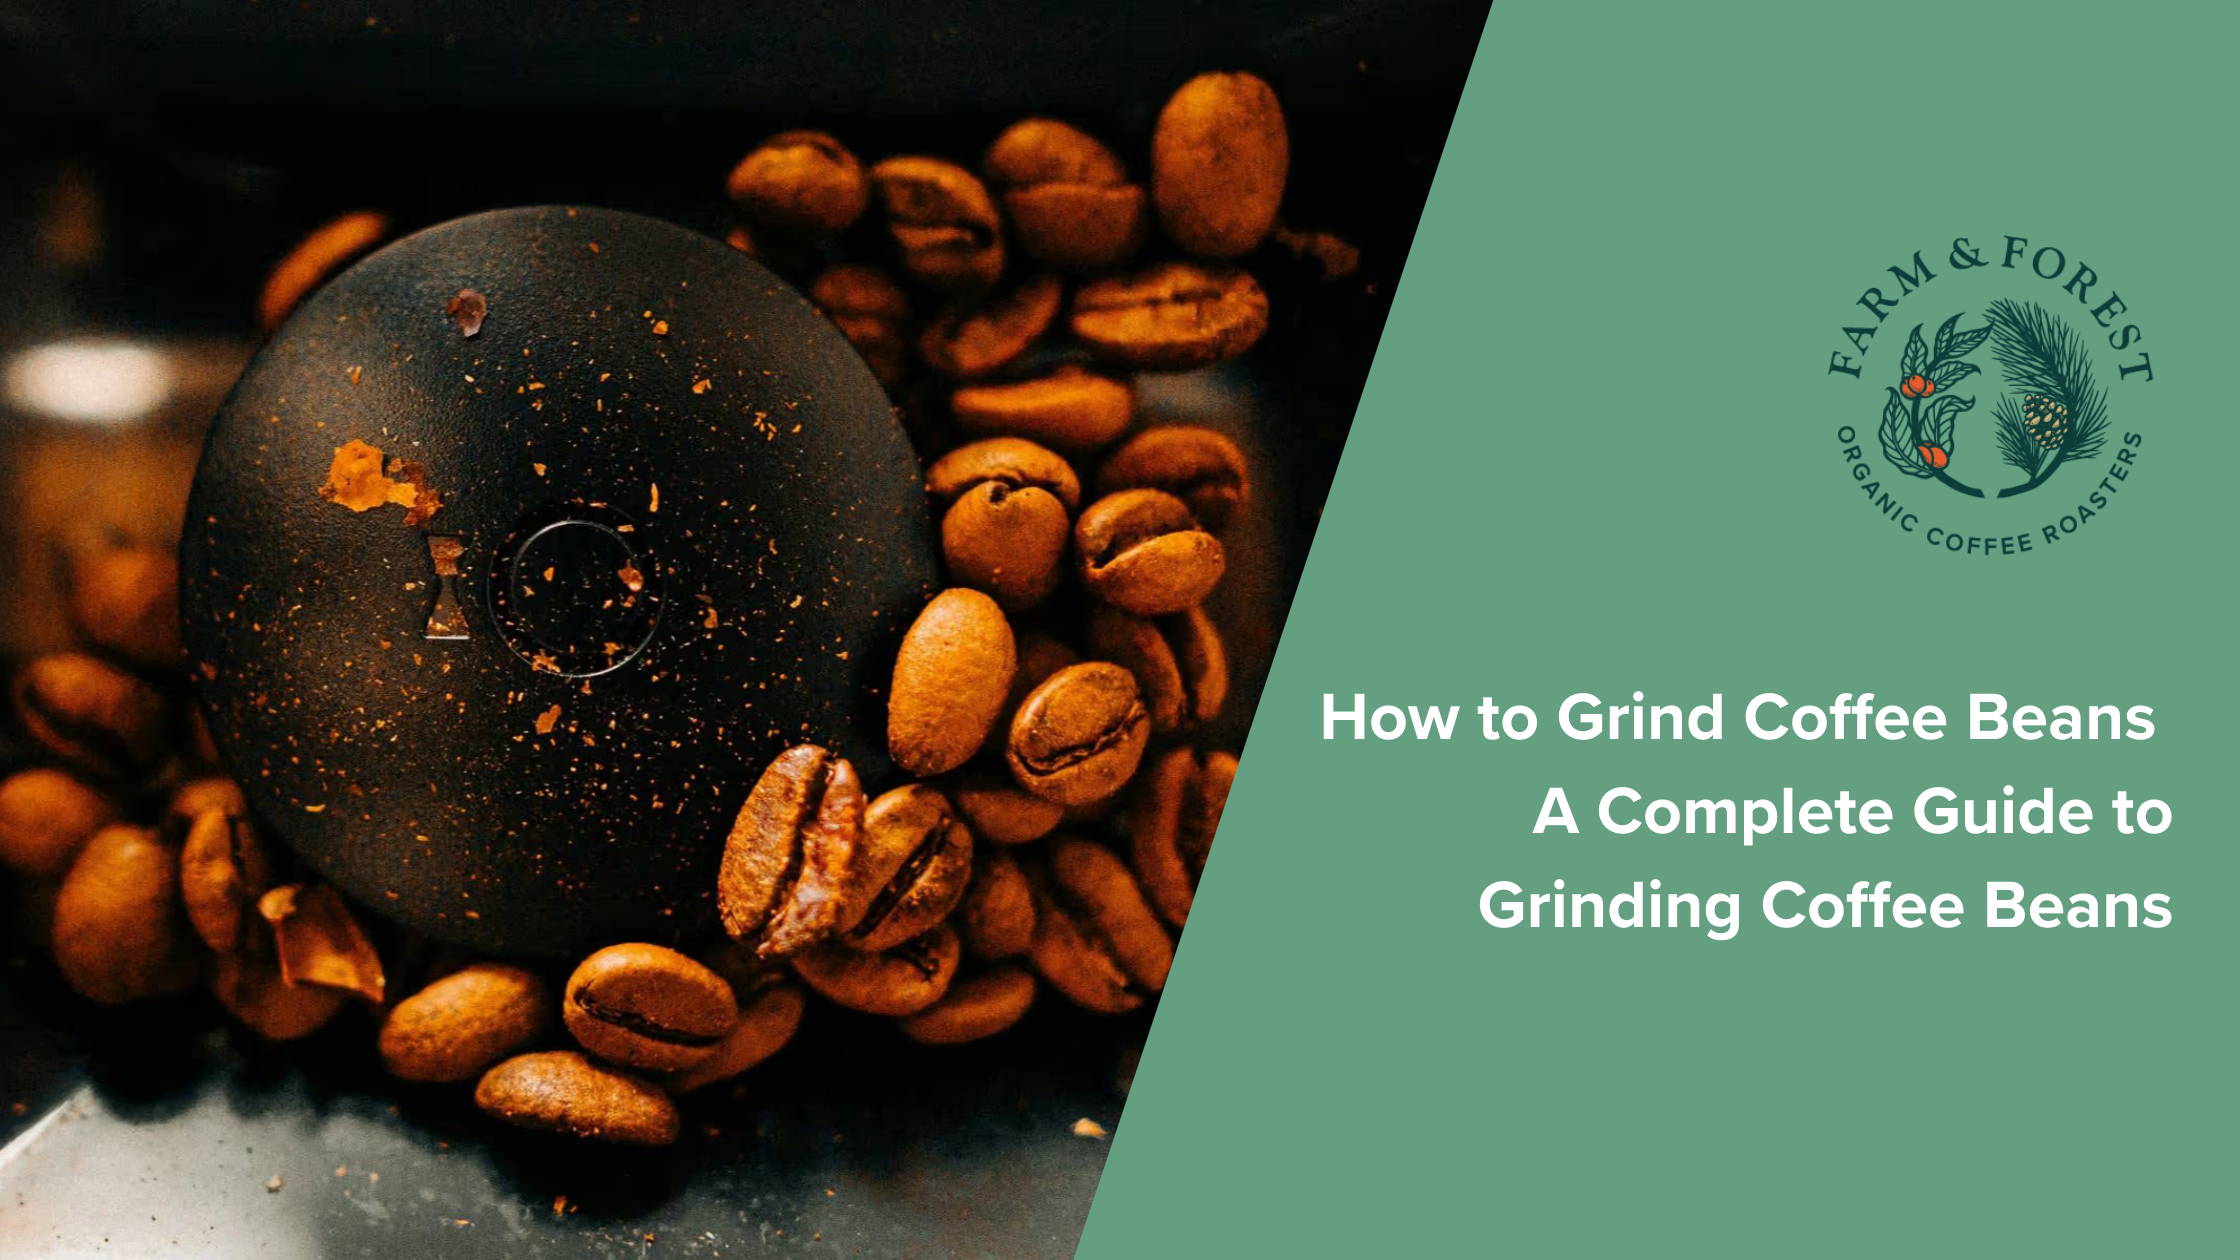 How to Grind Coffee Beans, A Complete Guide to Grinding Coffee Beans